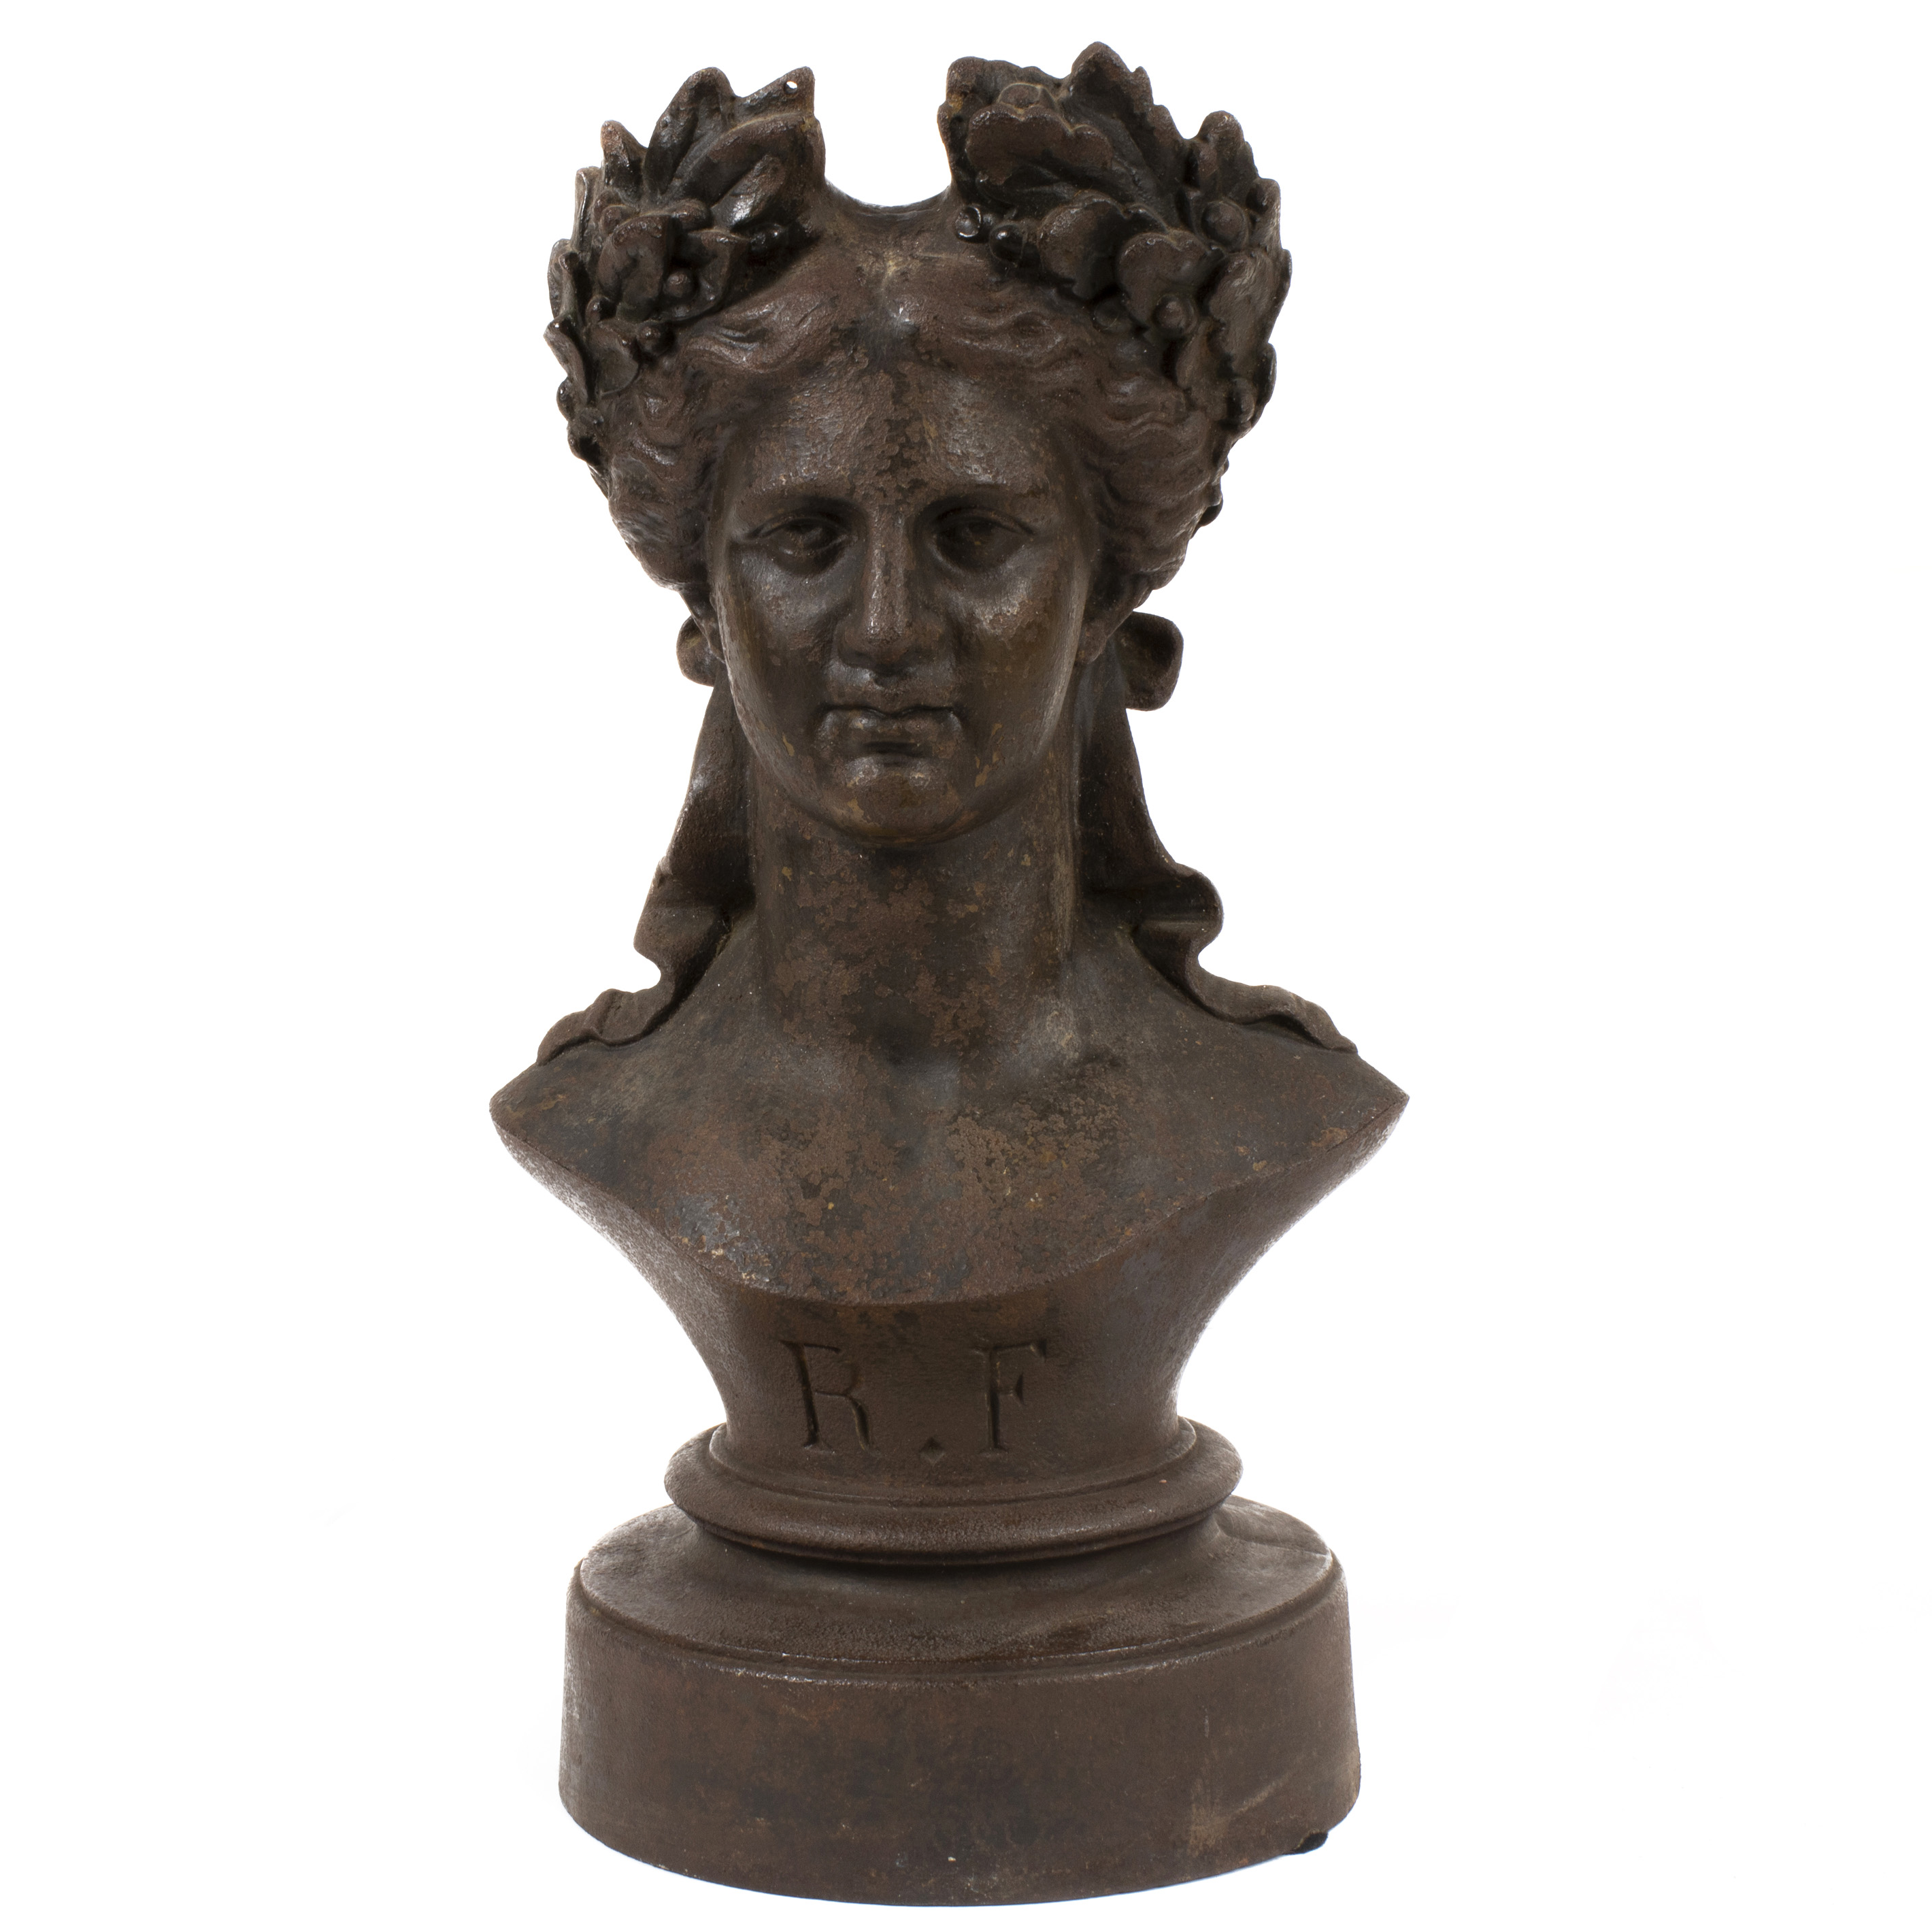 A GRAND TOUR STYLE IRON BUST DEPICTING